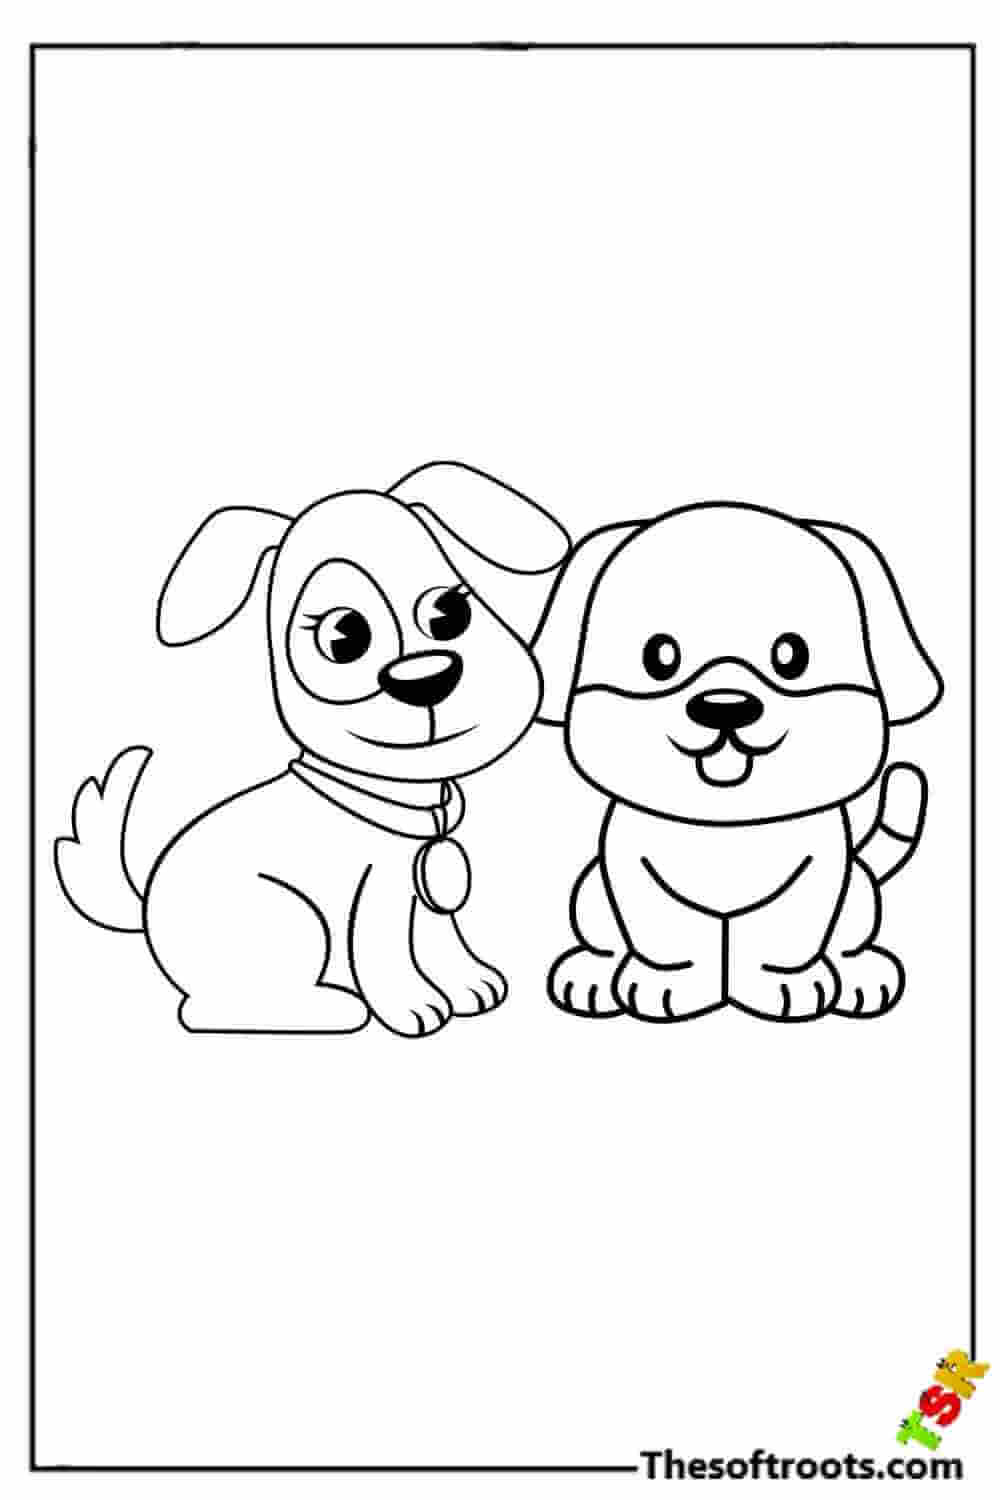 Dog puppies coloring pages